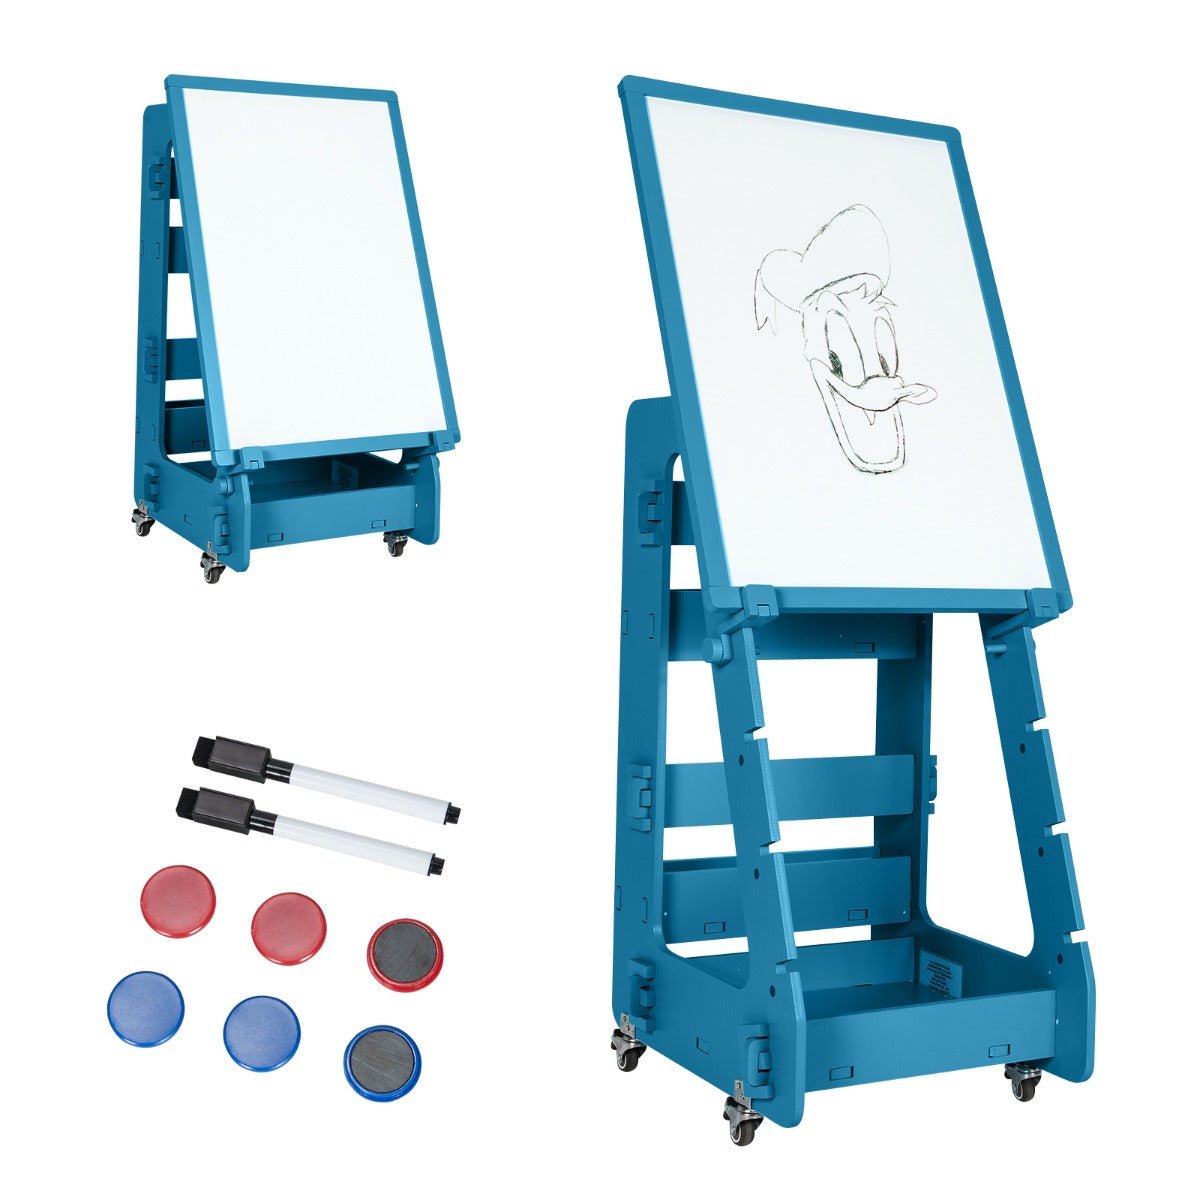 Navy Blue Children's Easel - Creative Fun with Built-in Storage